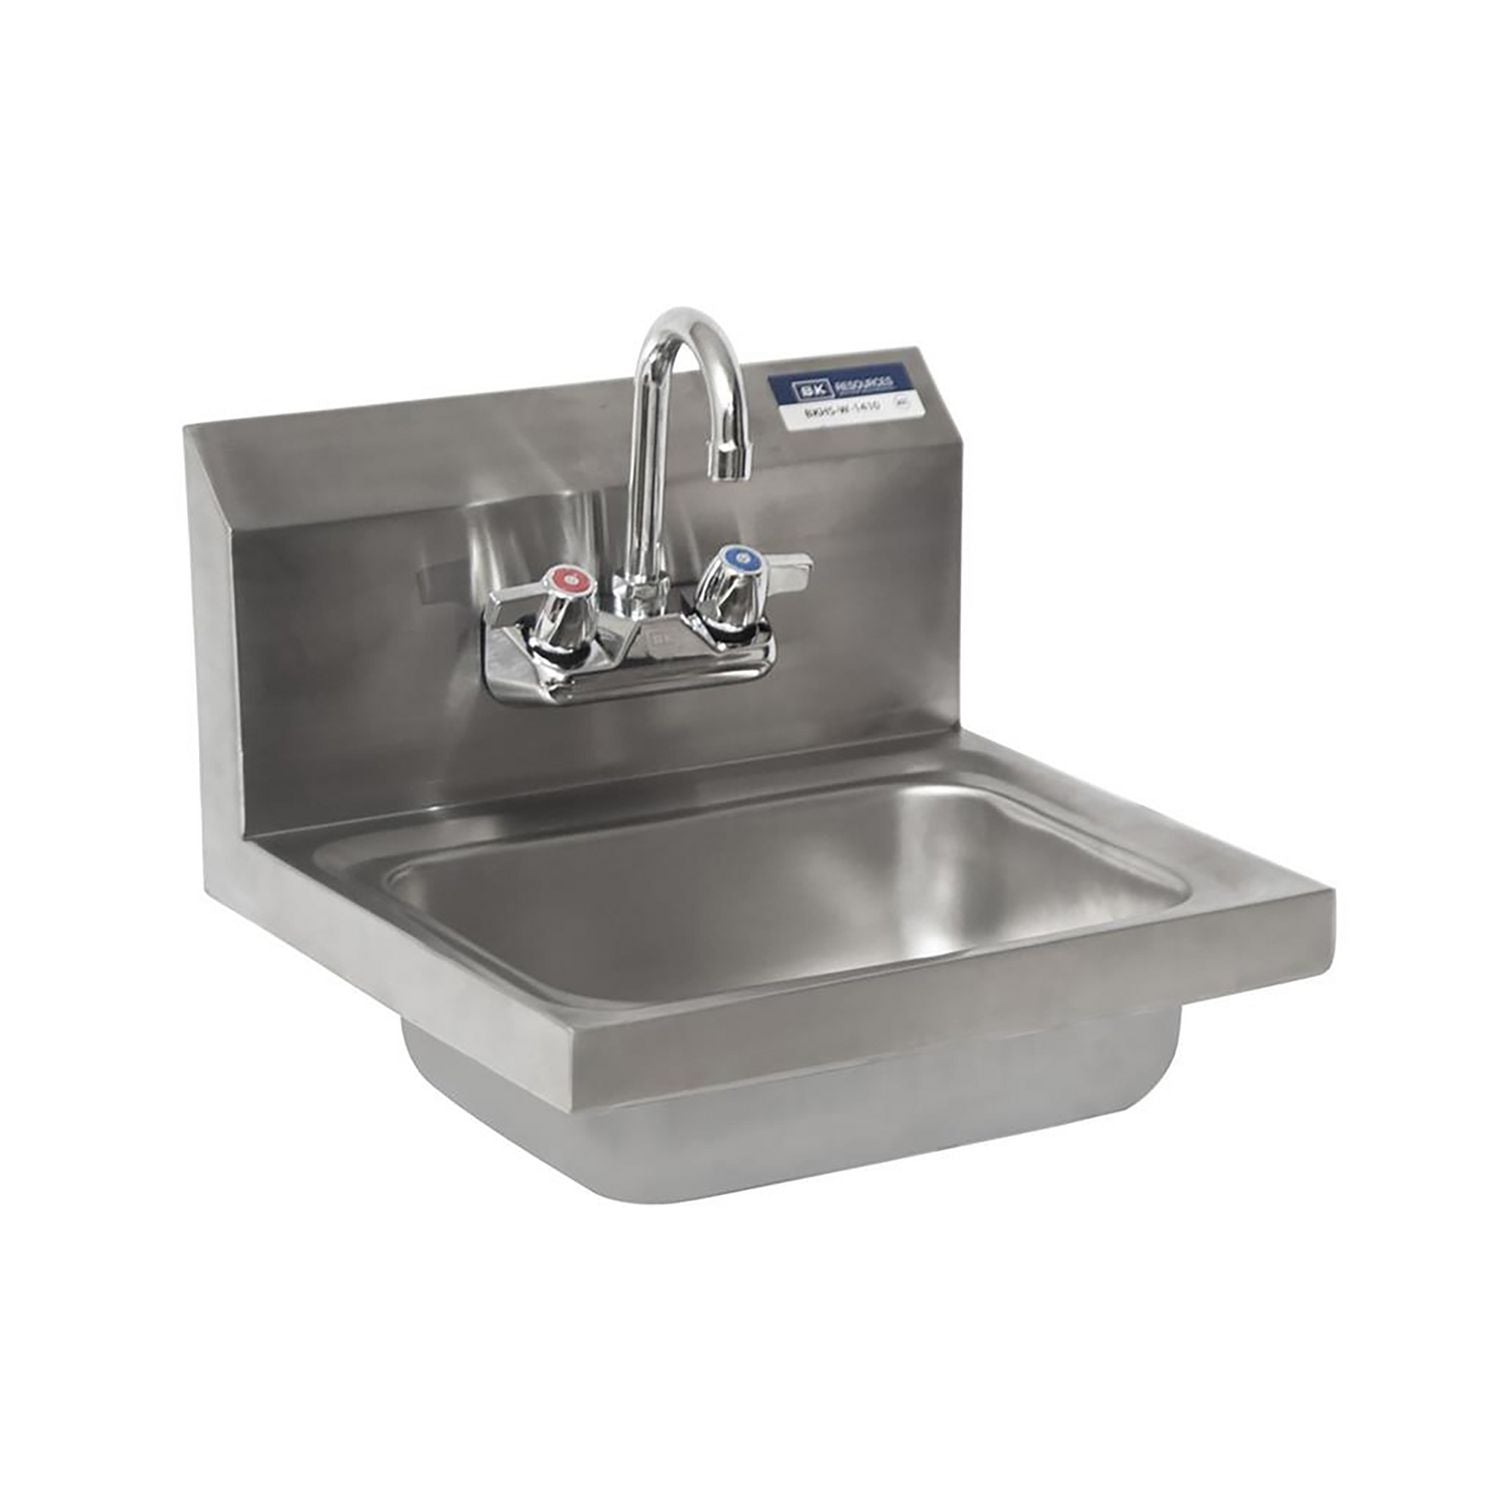 stainless-steel-hand-sink-with-faucet-14-l-x-10-w-x-5-d-ships-in-4-6-business-days_bkebkhsw1410pg - 1